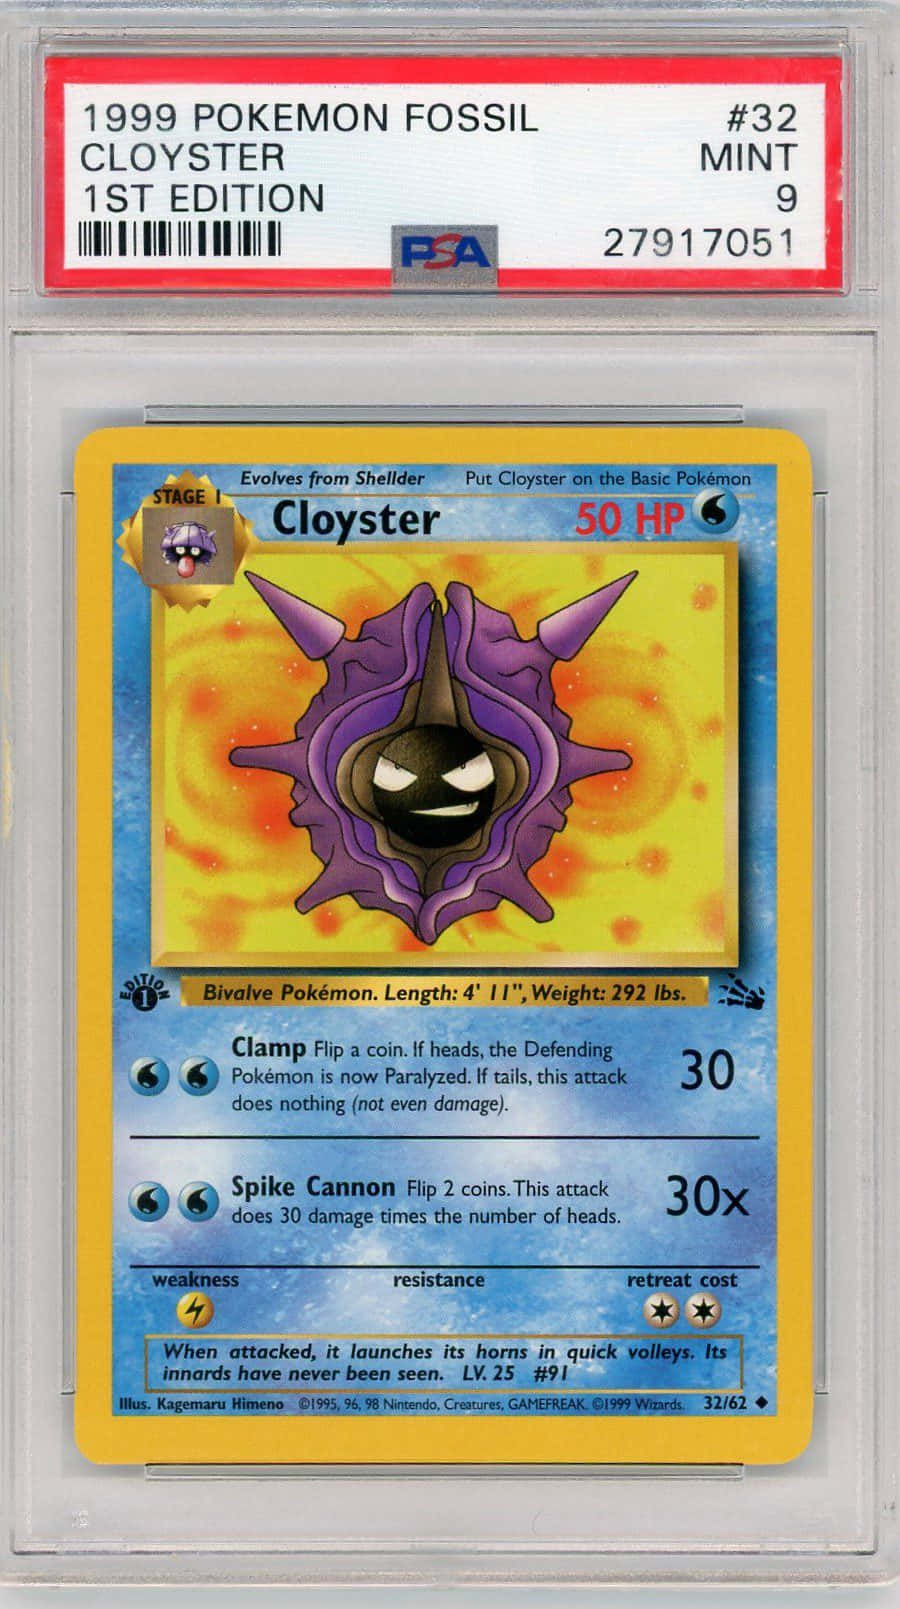 Caption: High Graded Cloyster Holo Card From 1999 Wallpaper